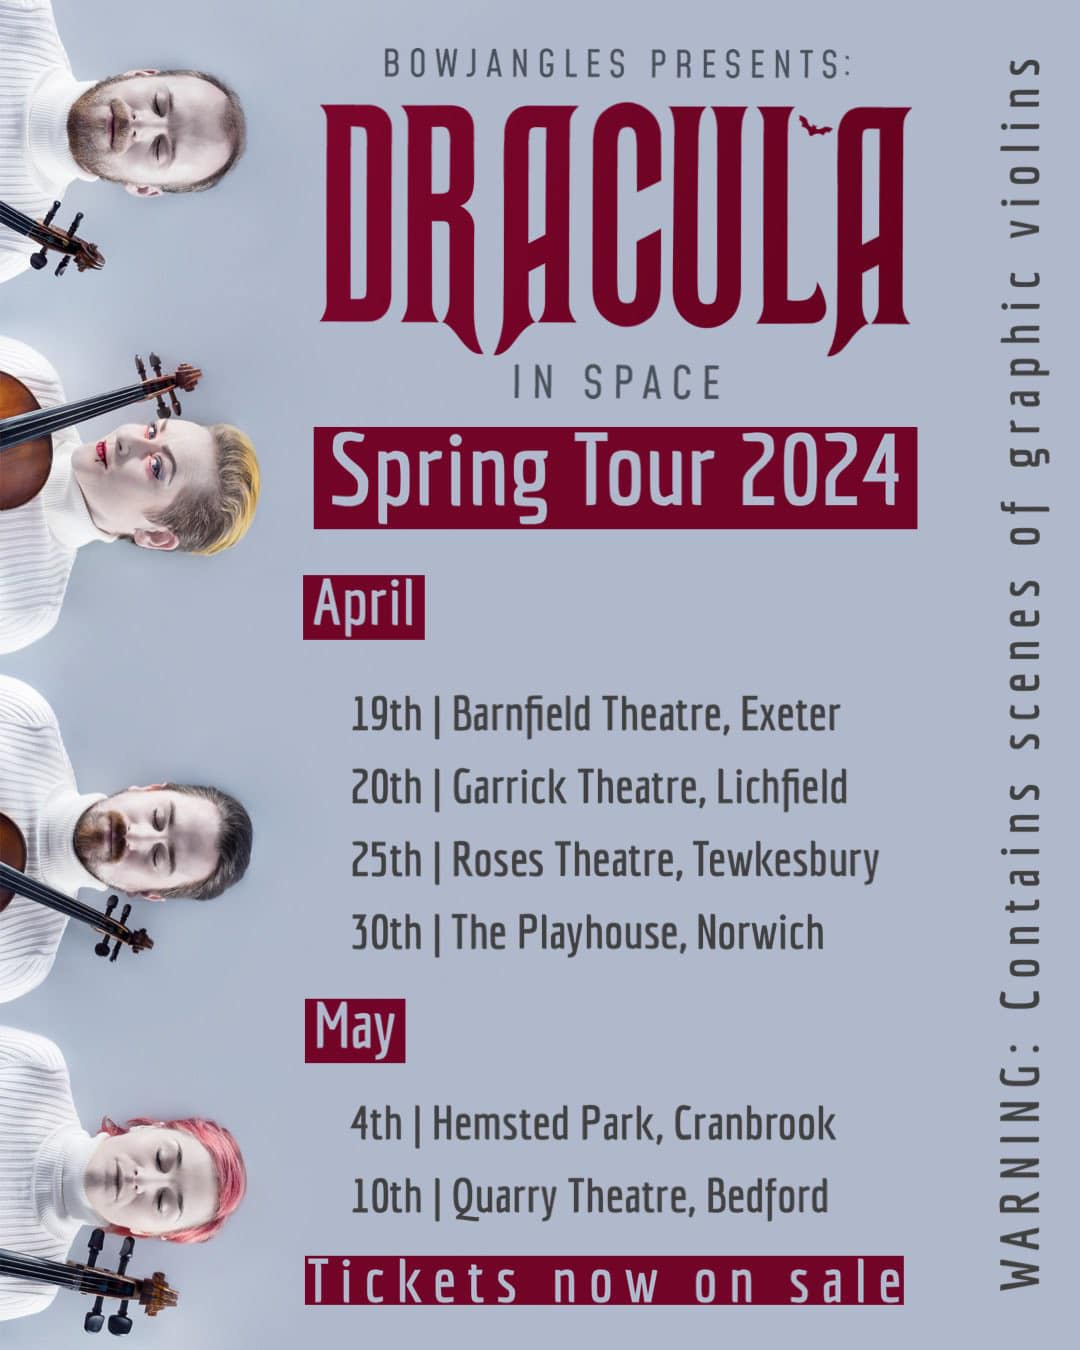 May be an image of 2 people and text that says "April BOWJANGLES PRESENTS: DRACULA I o IN SPACE fami Spring Tour 2024 of 19th Barnfield Theatre, Exeter 18 신로도 20th Garrick Theatre, Lichfield 25th Roses Theatre, Tewkesbury 30th The Playhouse, Norwich MUMI Tin MARA CATNAN sale e May 10th 4th Hemsted Park, Cranbrook Theatre, Bedford Tickets now on"